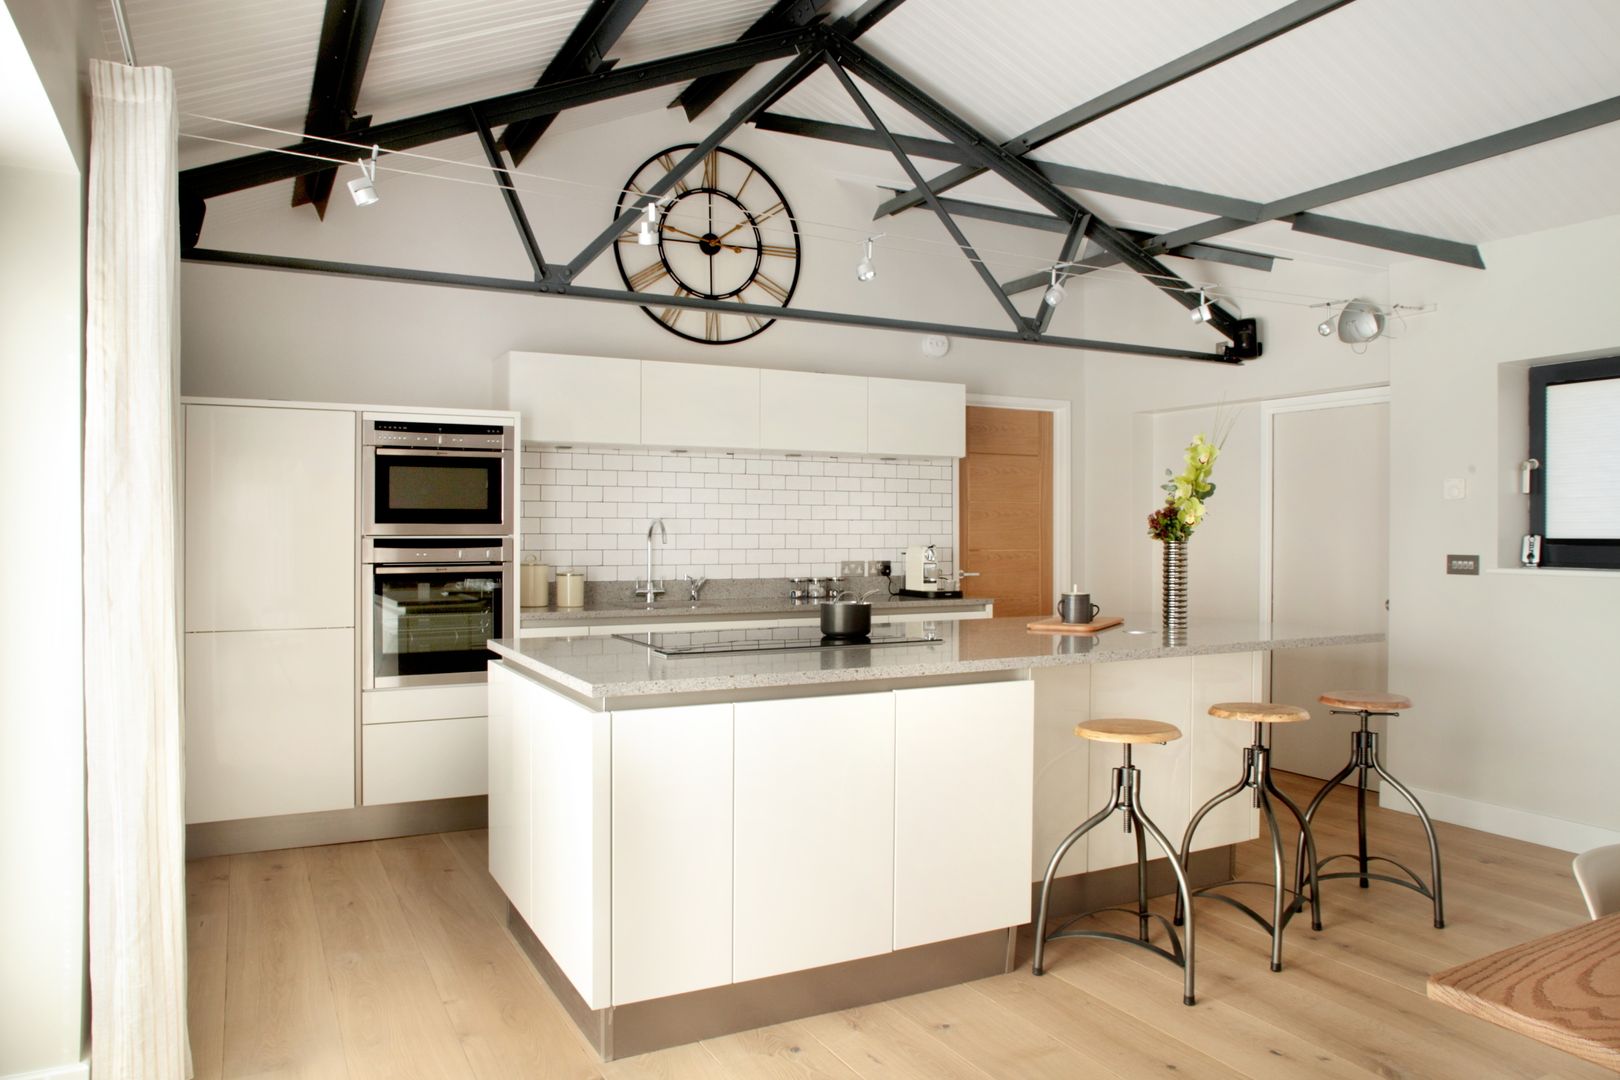 The Cow Shed Barn Conversion Kitchen in-toto Kitchens Design Studio Marlow Kitchen